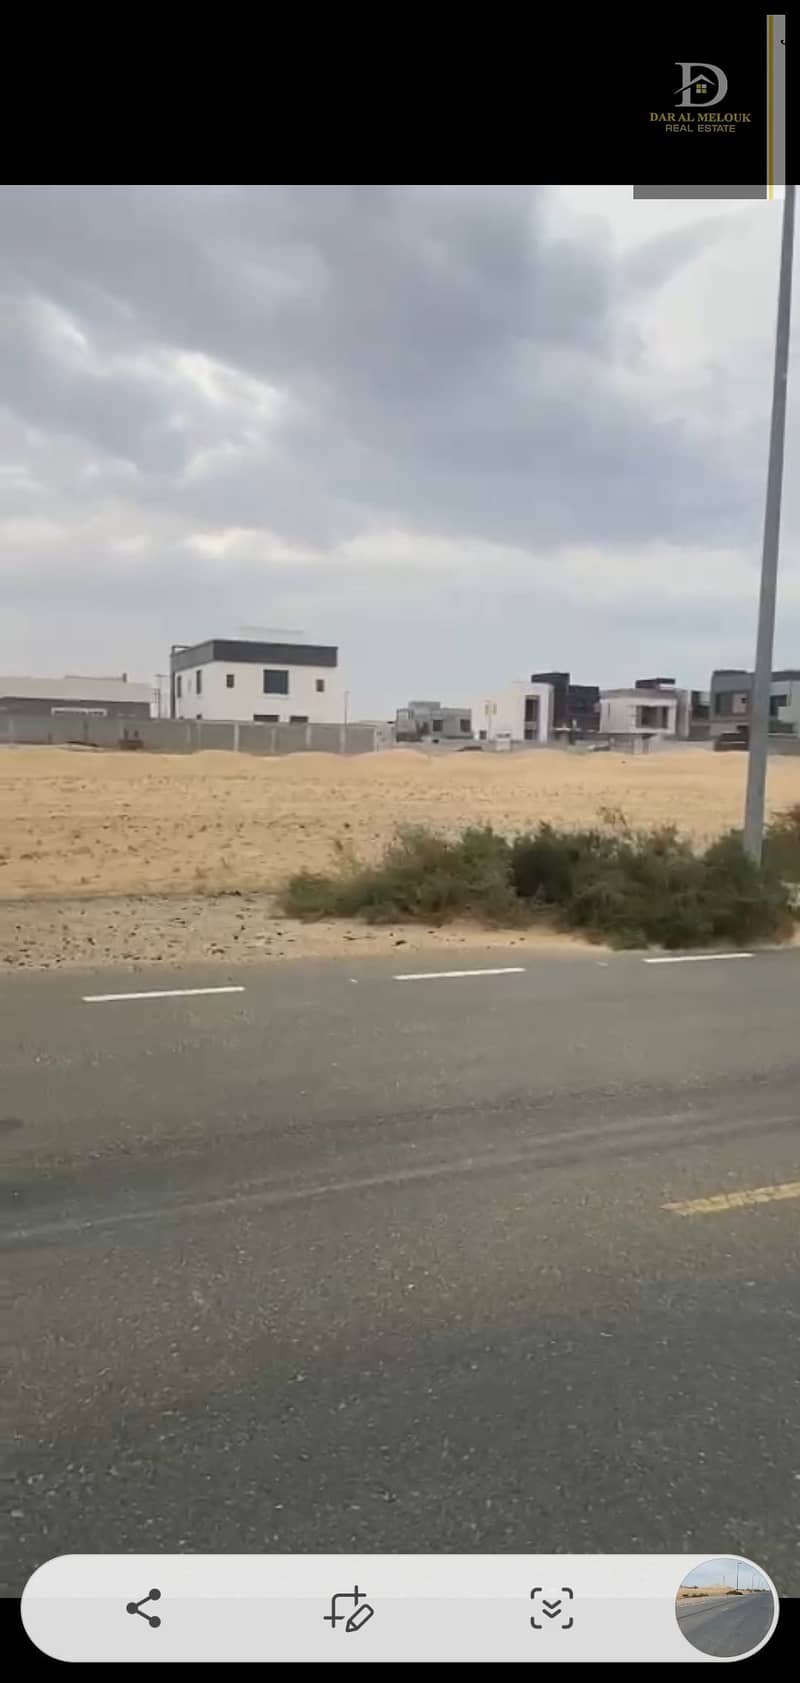 For sale in Sharjah, Al-Hoshi area, residential land, area of ​​9200 feet, a permit for a ground and first villa, and two attached villas are declared, with freehold installments completed, for all Arab nationalities, on two streets, front and back, towar